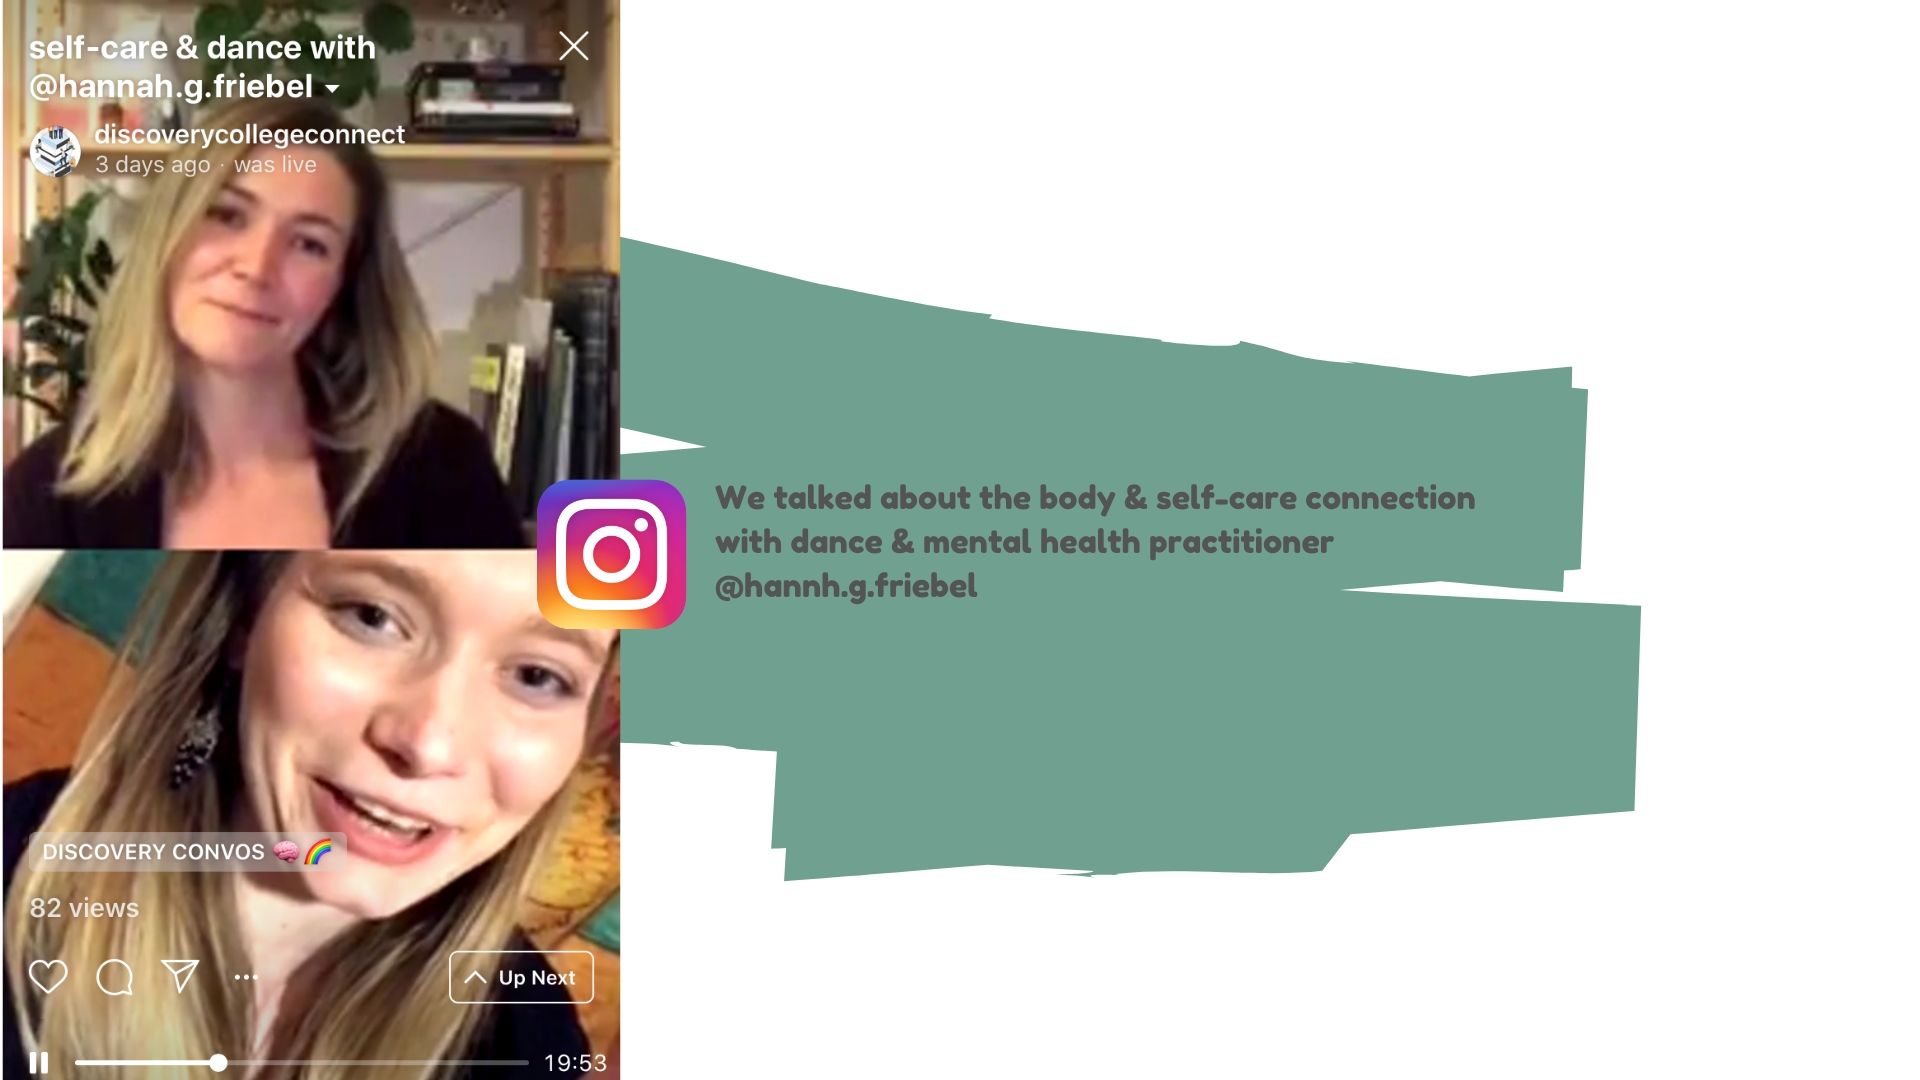 This discovery convo is about self-care and the body